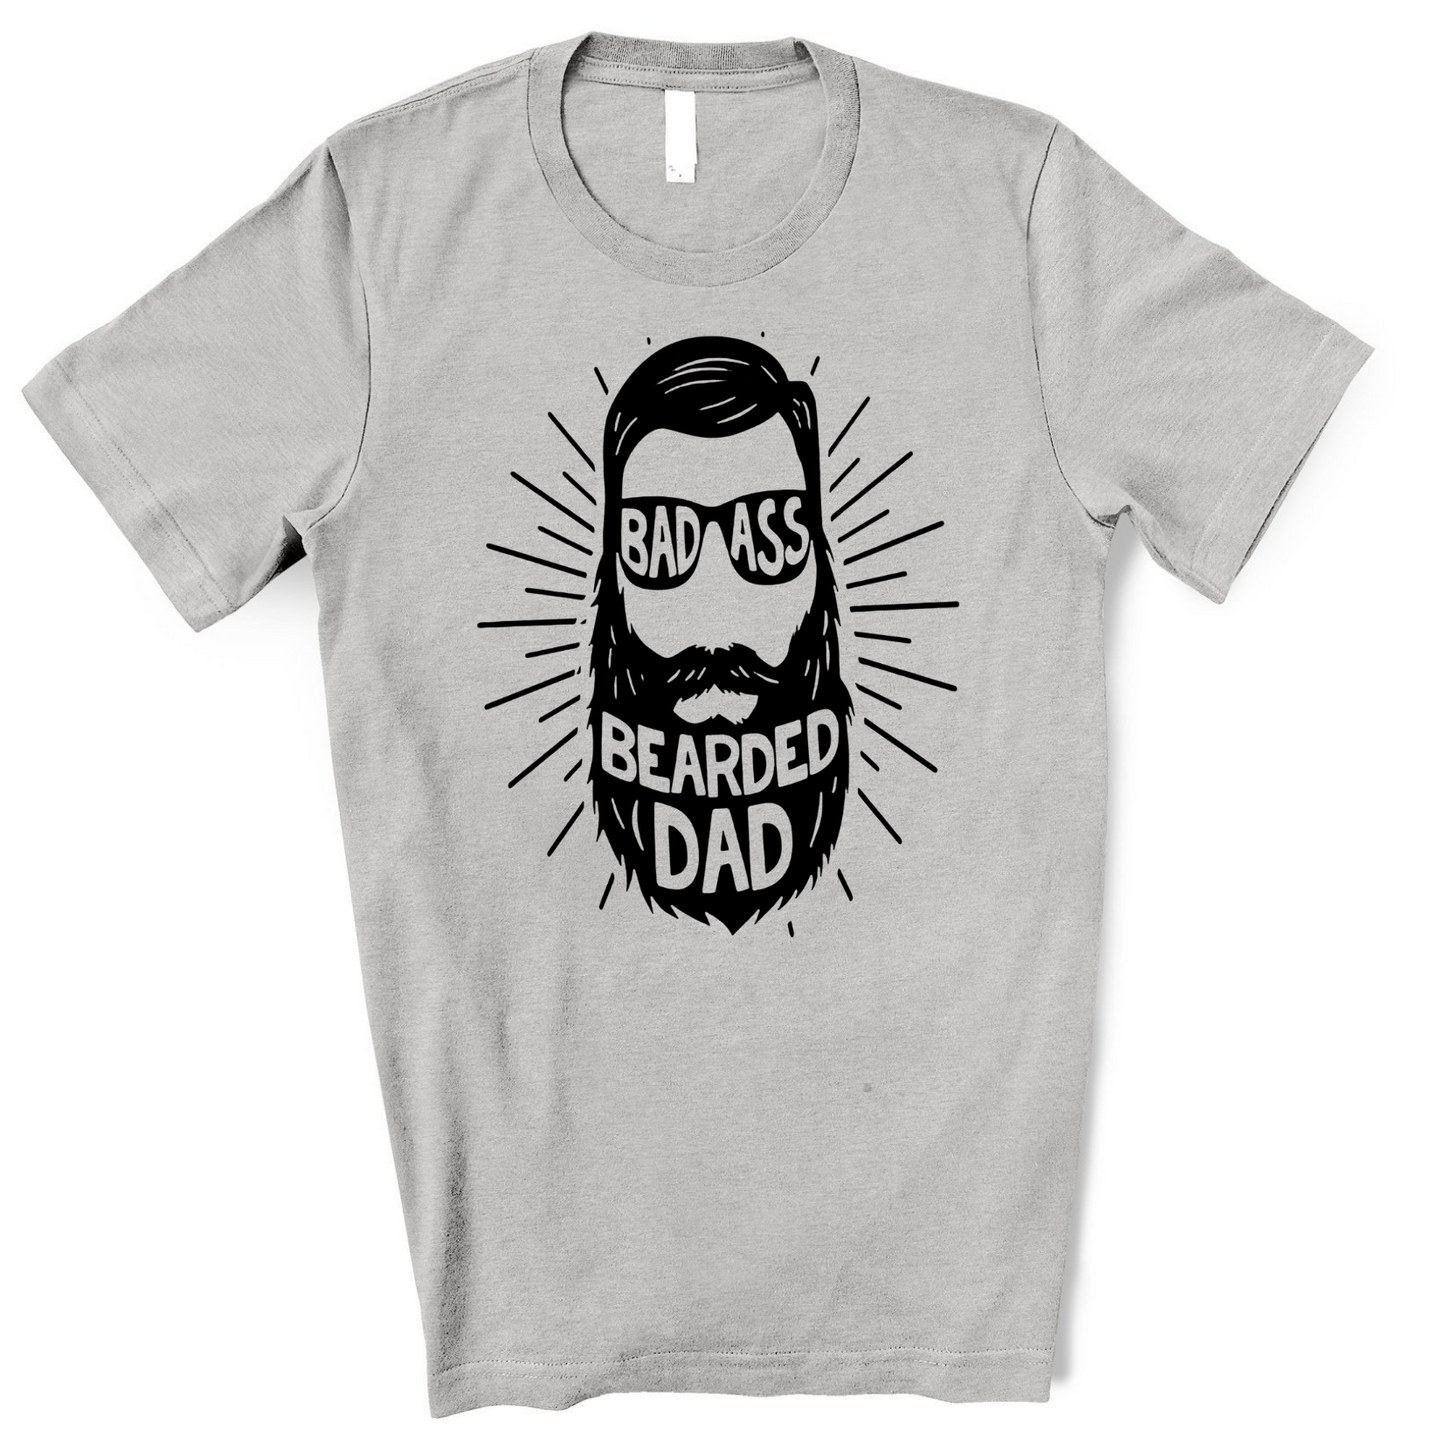 Bad As* Bearded Dad - Screen Print Transfer Graphic Tee